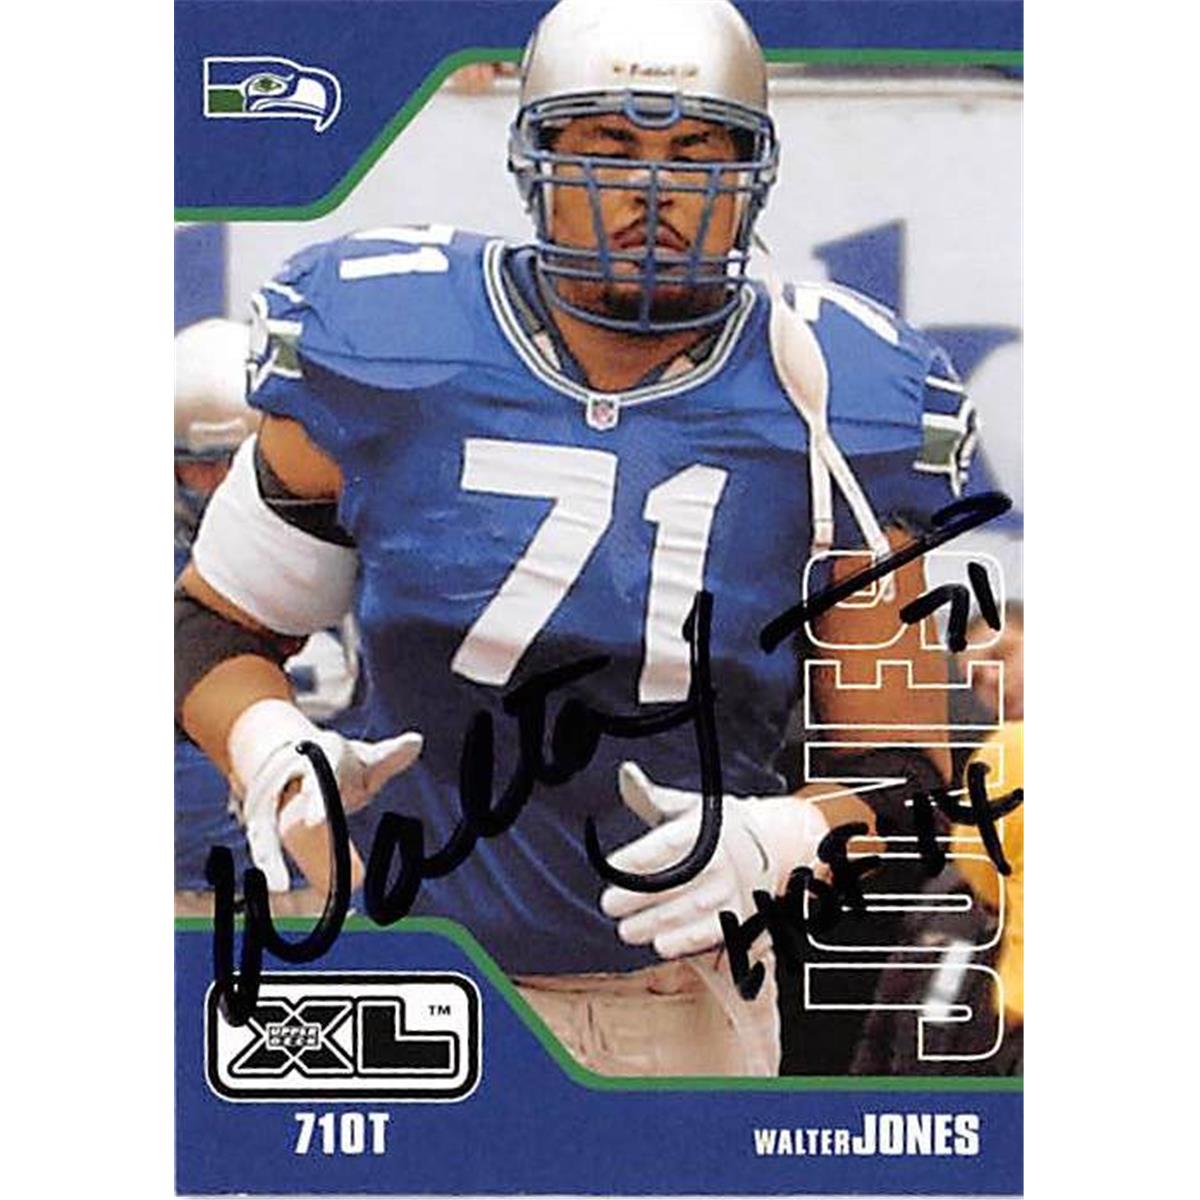 Picture of Autograph Warehouse 409740 Walter Jones Autographed Football Card - Seattle Seahawks 2002 Upper Deck XL No.428 inscribed HOF14